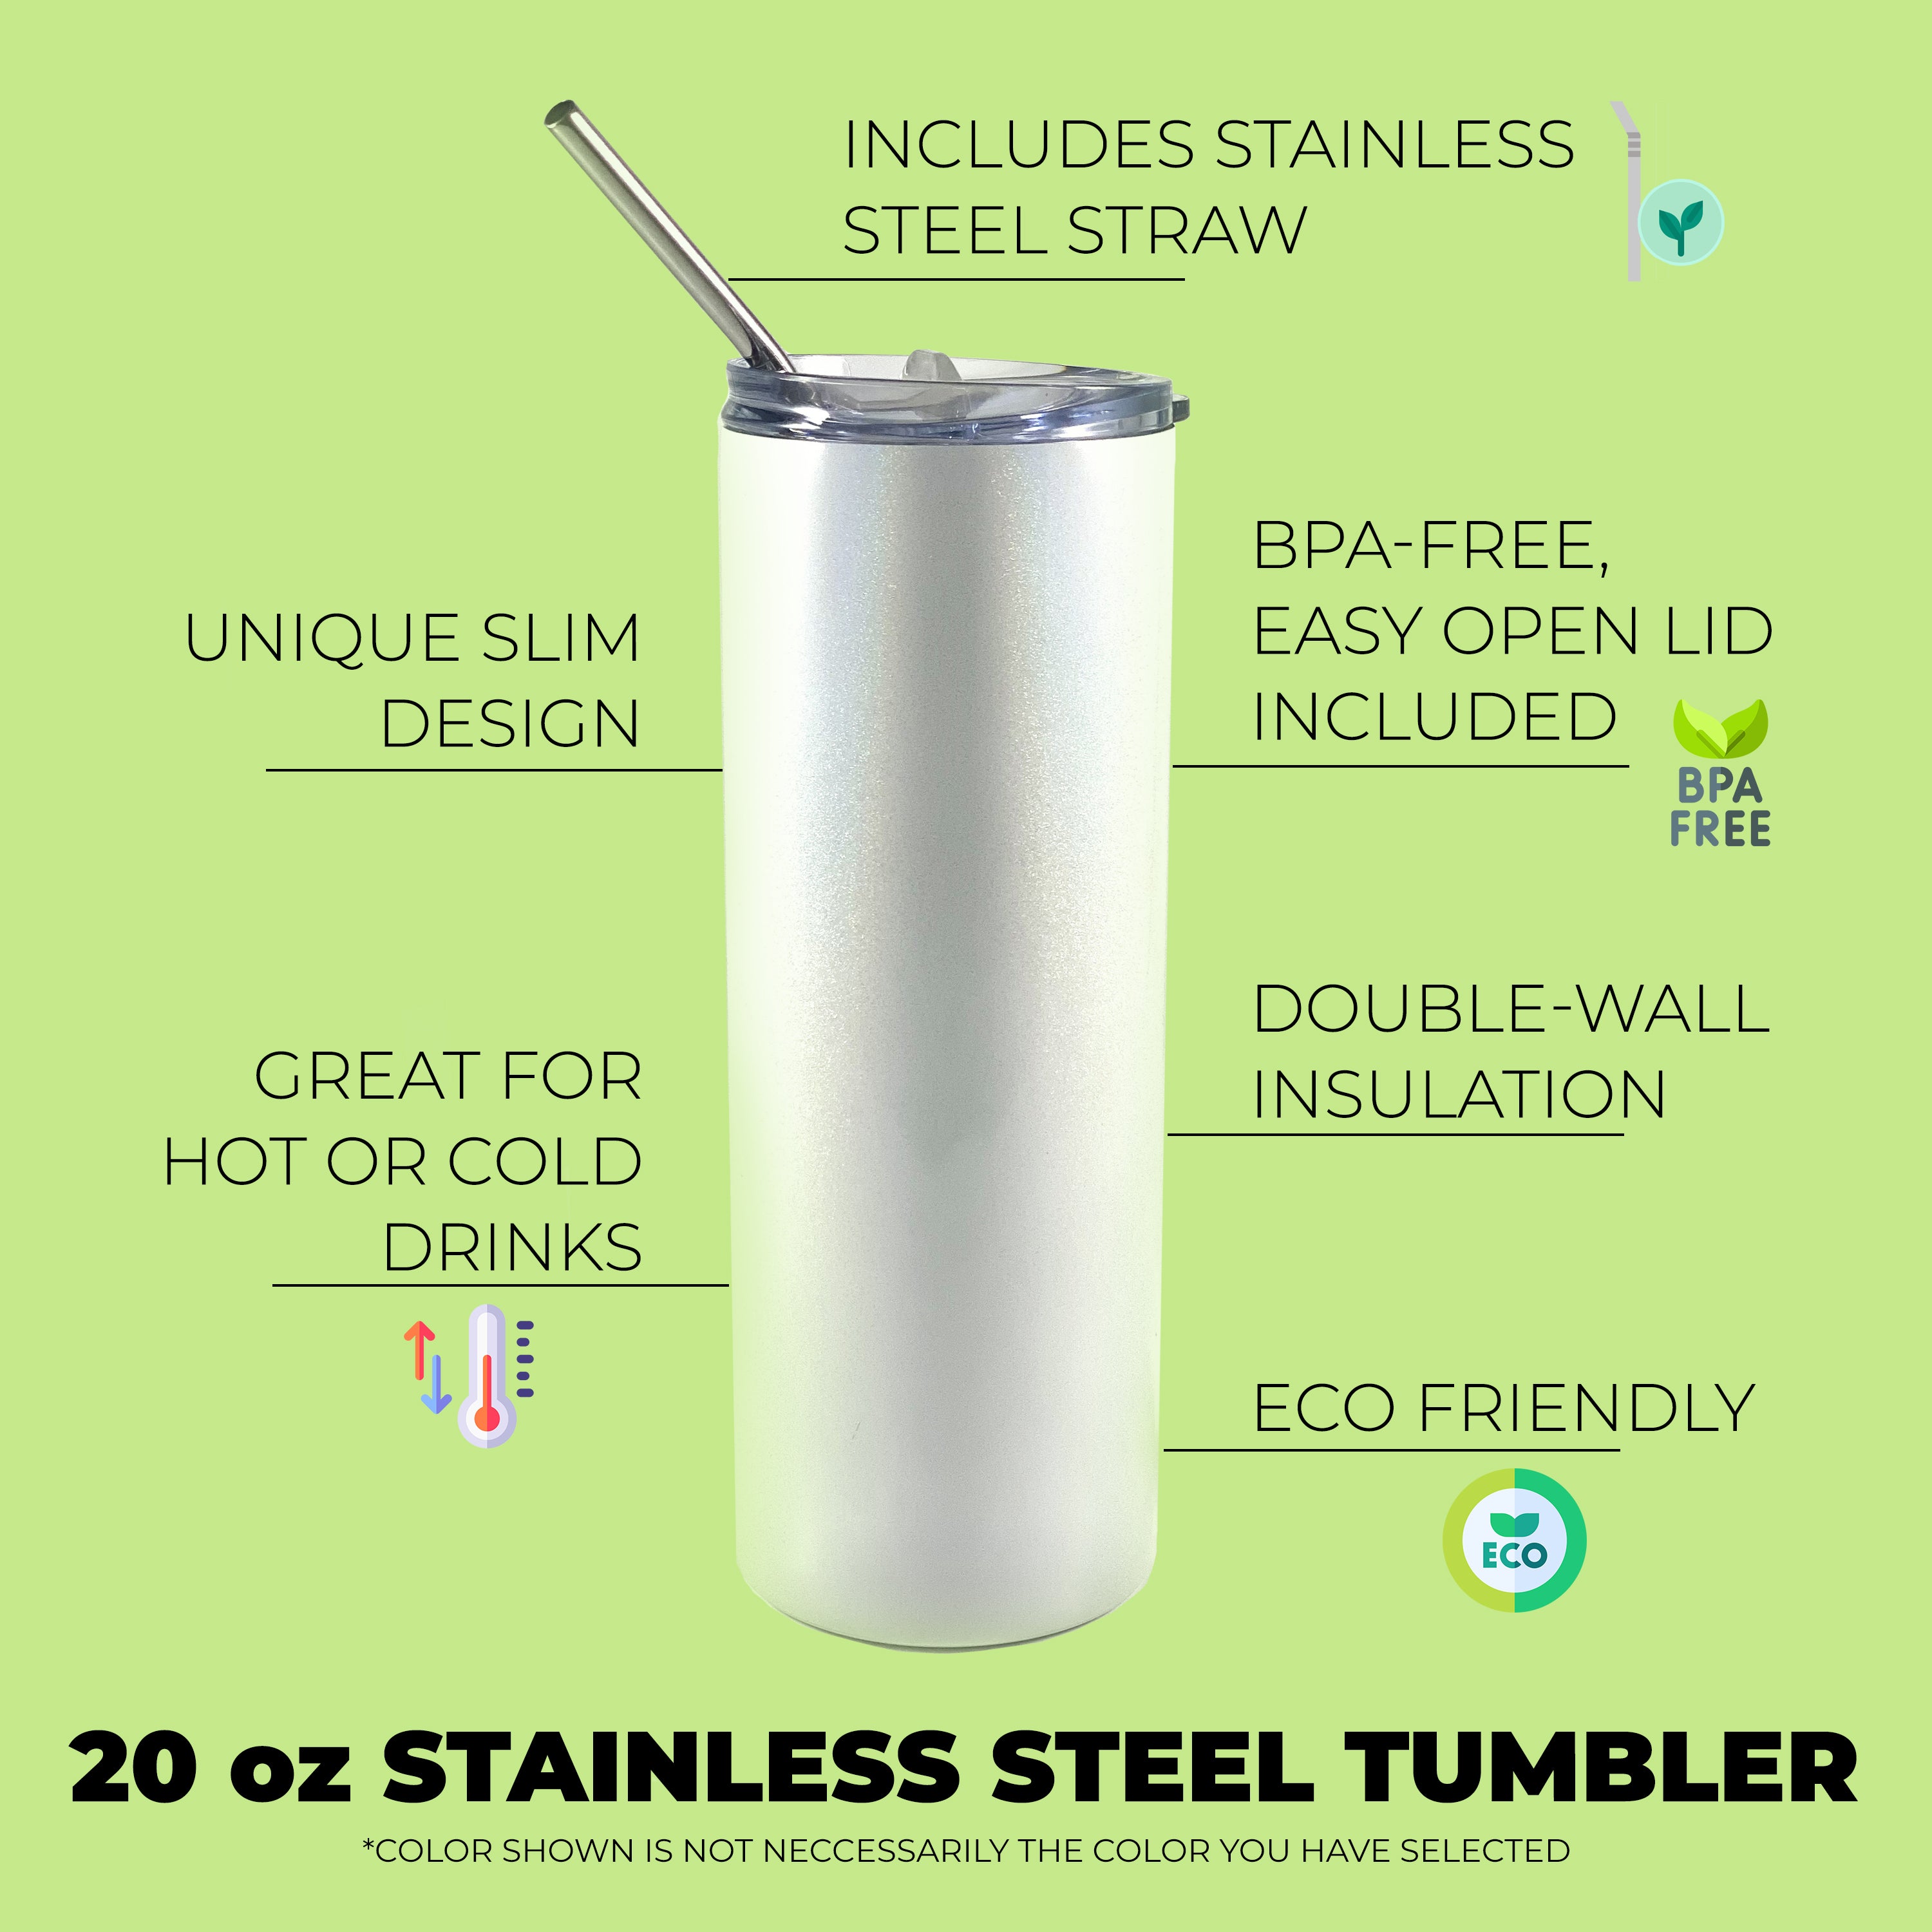 Sports Collection (Hockey Mom - Personalized) 20 oz Stainless Steel Travel Tumbler with Straw